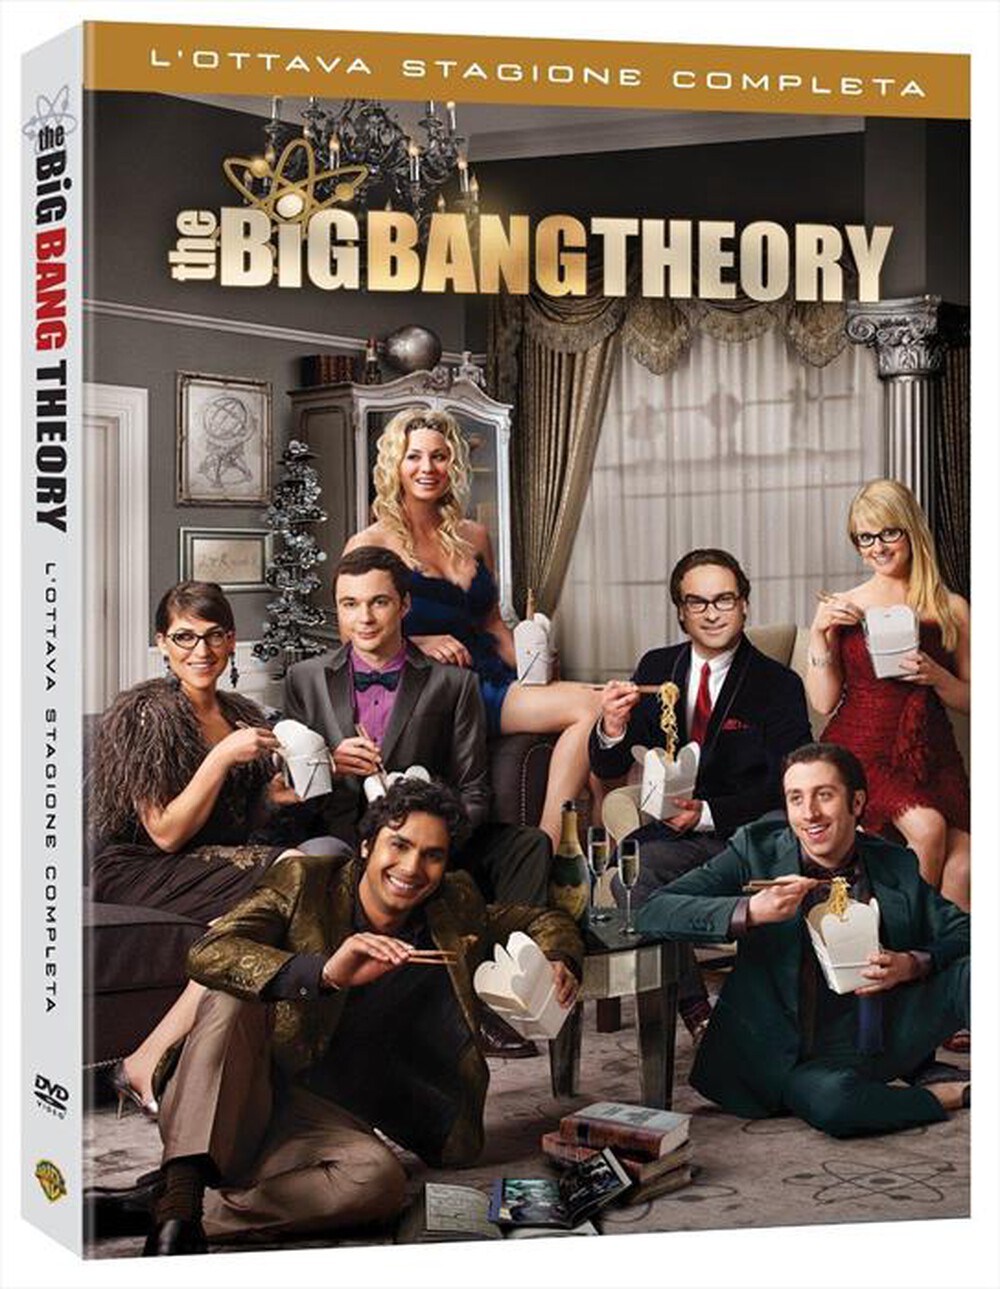 "WARNER HOME VIDEO - Big Bang Theory (The) - Stagione 08 (3 Dvd)"